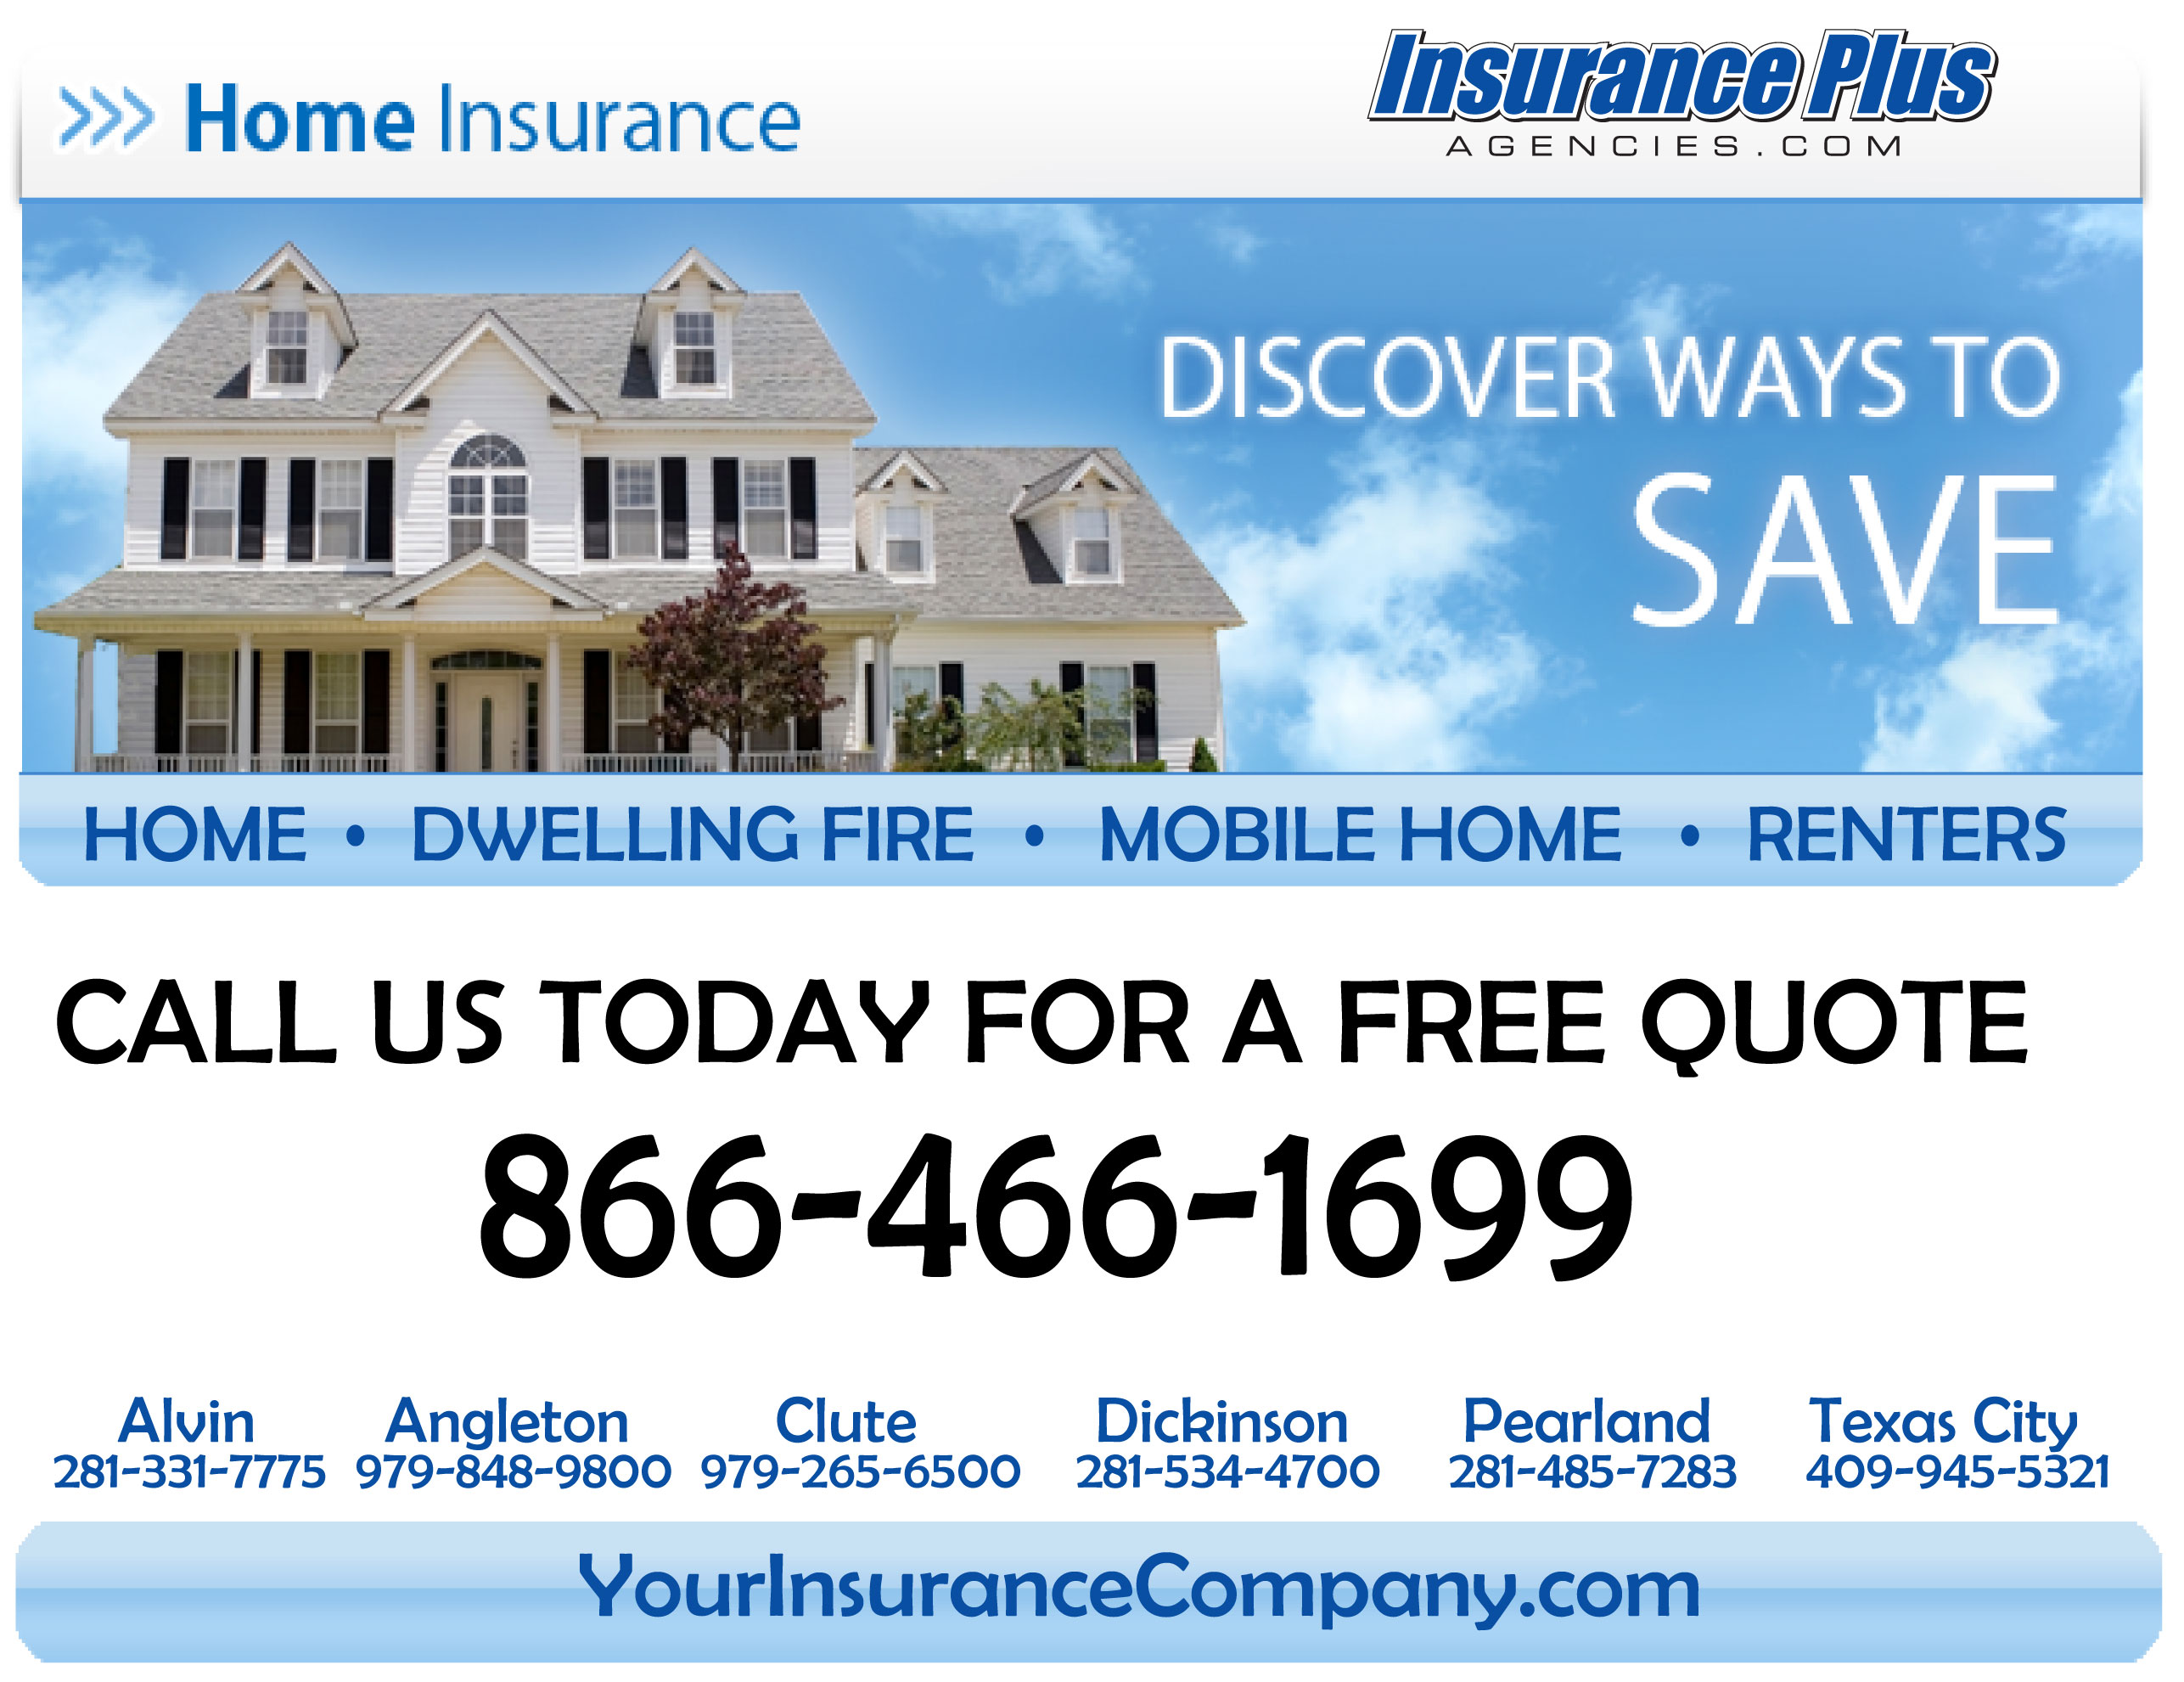 Texas Home Insurance from Insurance Plus Agencies 